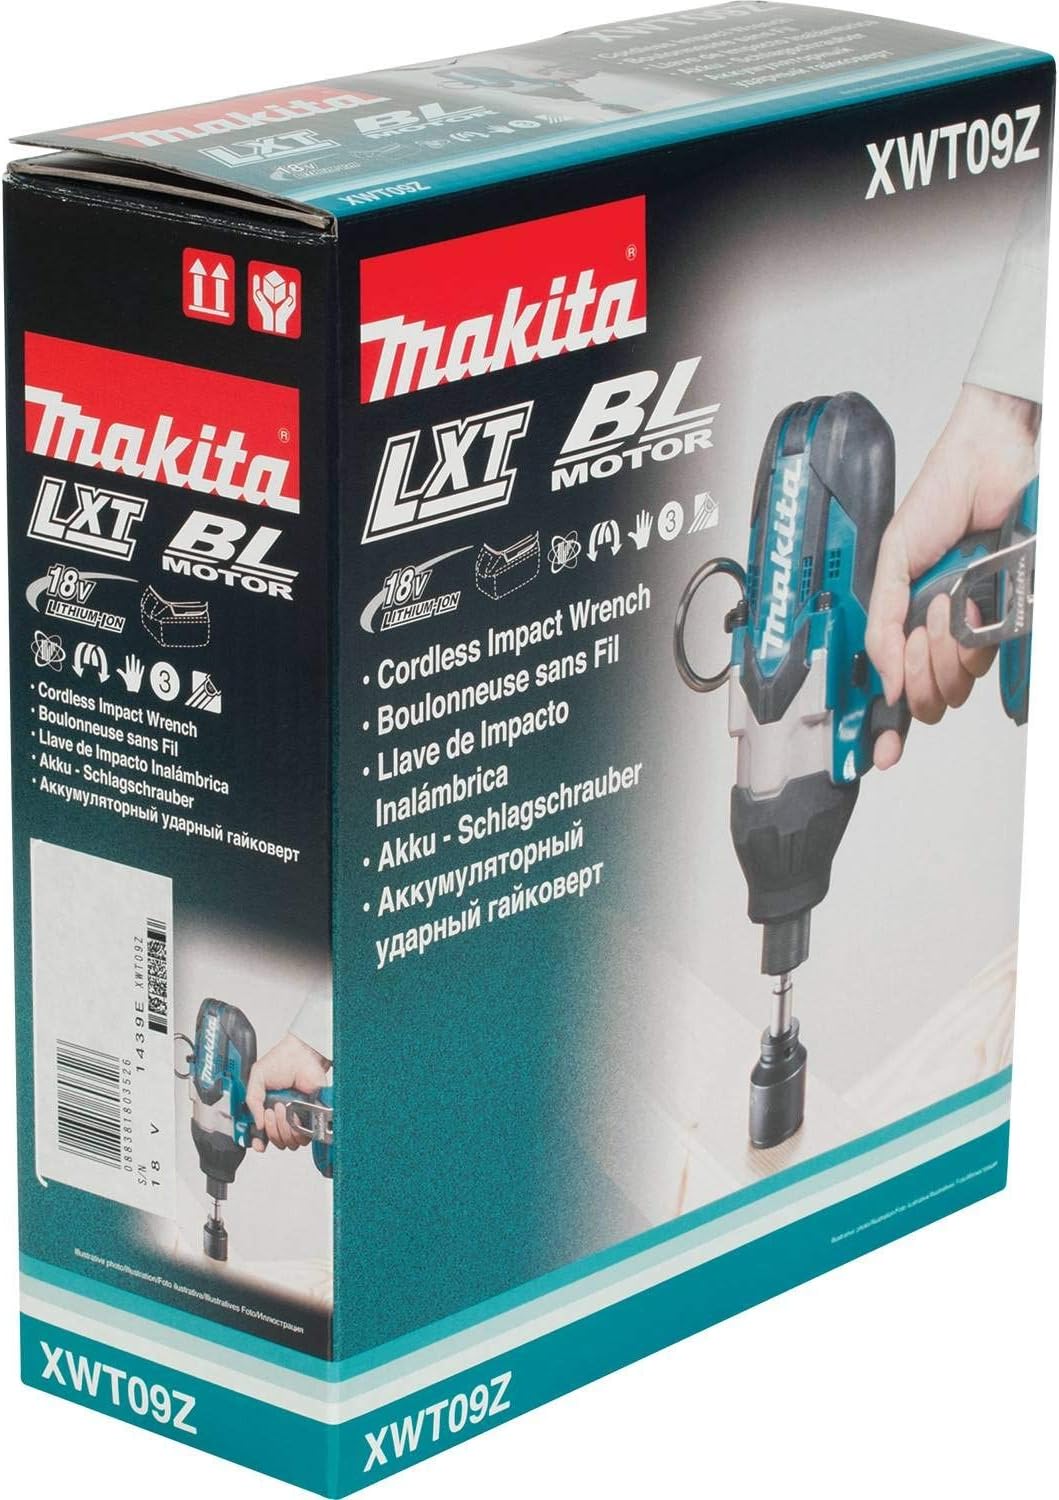 Makita XWT09Z LXT Lithium-Ion Brushless Cordless High Torque Hex Impact Wrench, 18V/7/16